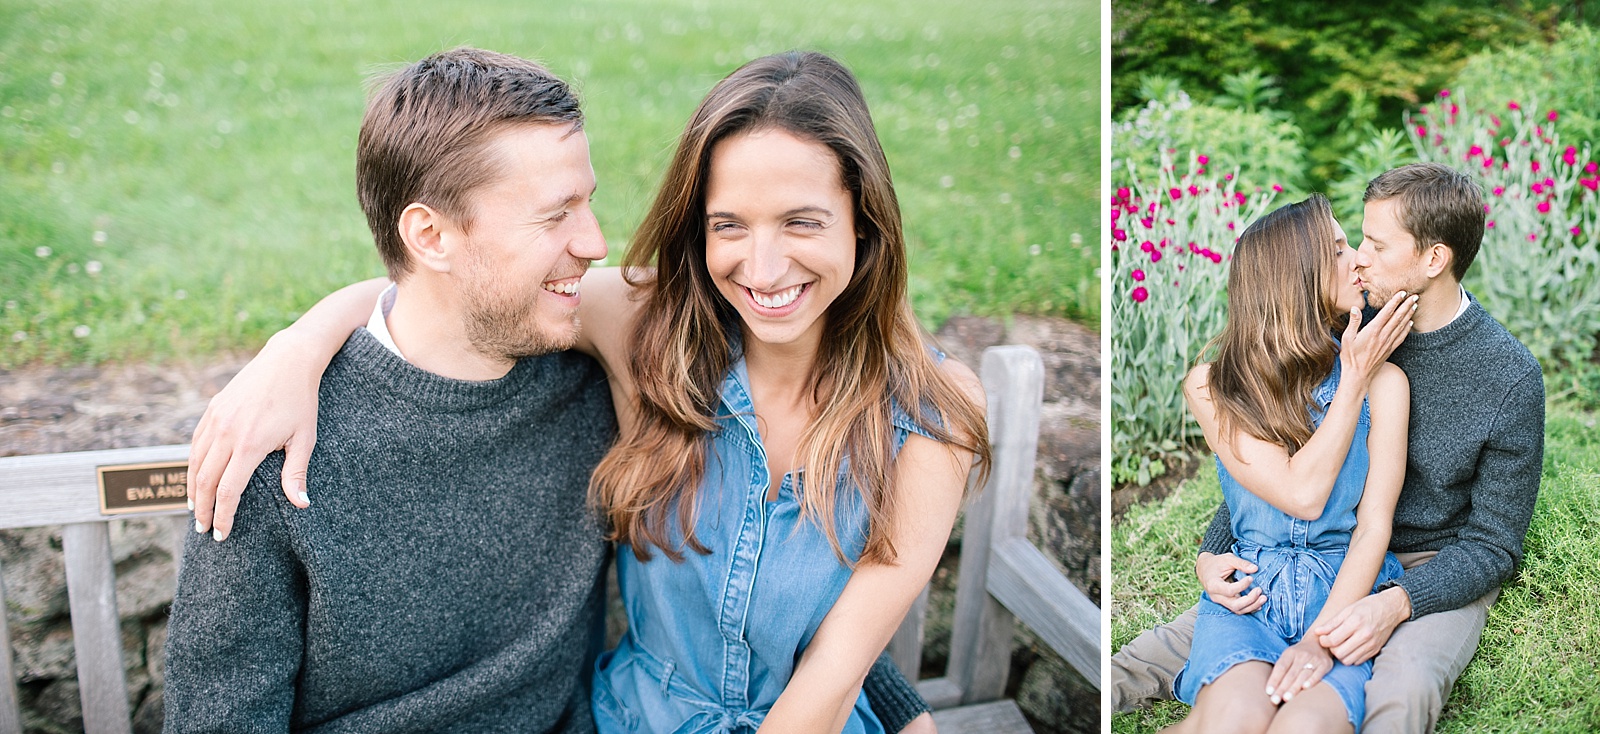  Engagement session with New Jersey, New York and destination wedding photographer Ashley Mac Photographs 